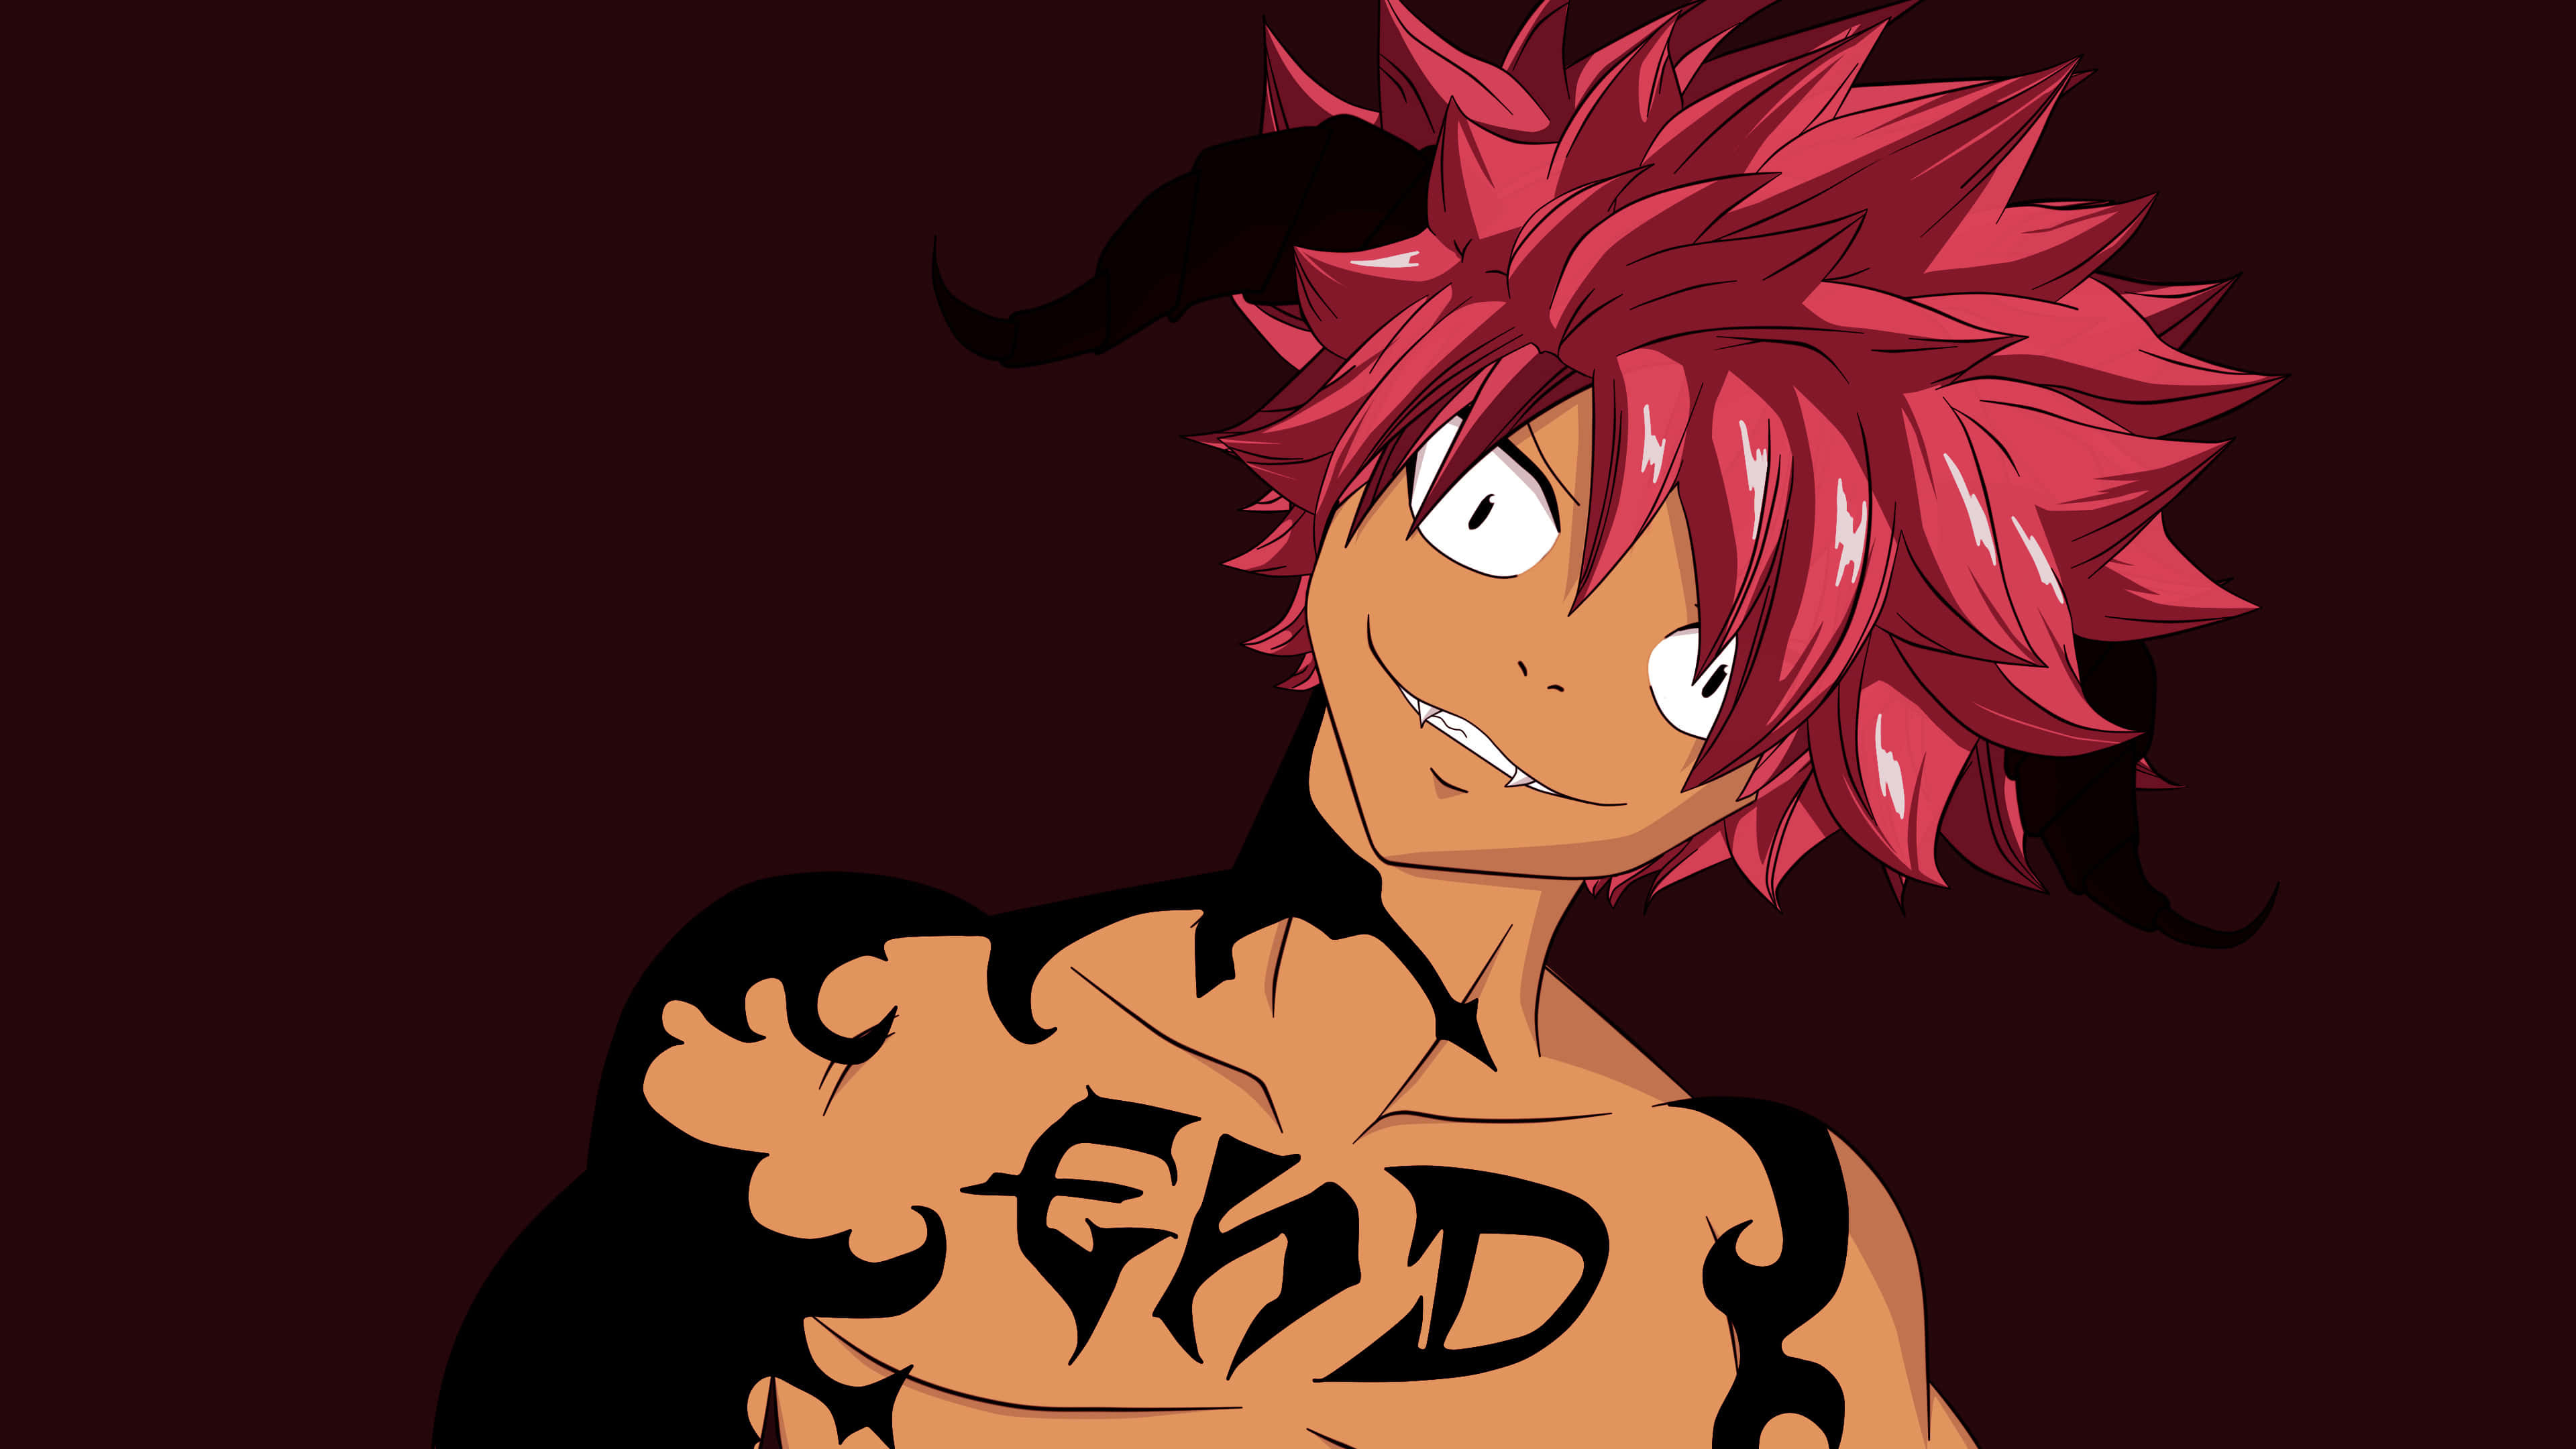 Natsu (Fairy Tail): The younger brother of Zeref Dragneel, having originally died 400 years ago. 3840x2160 4K Wallpaper.